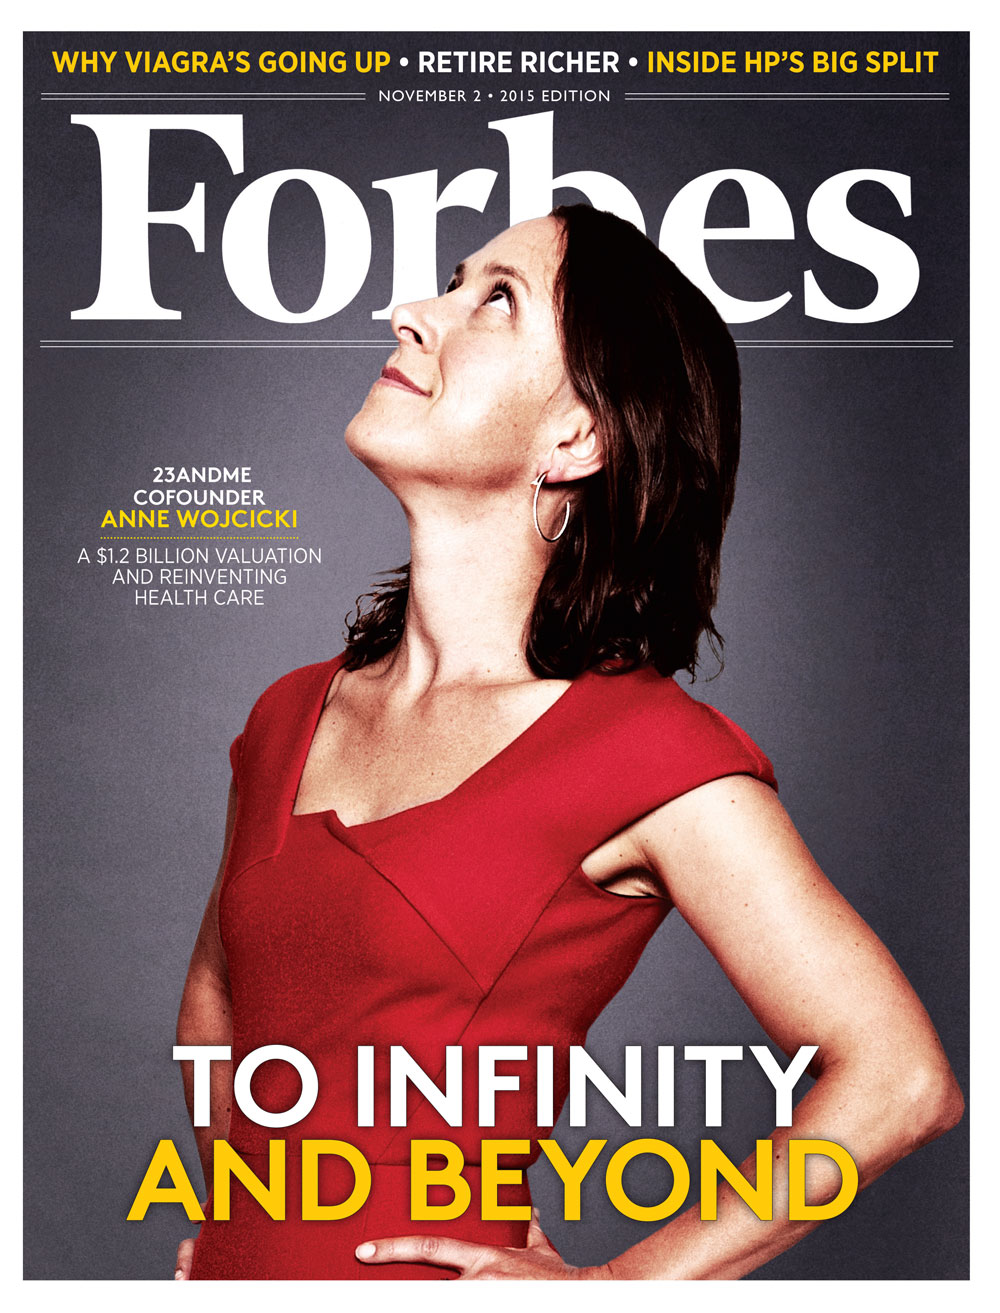 A woman in a white dress holding a white frisbee - 23andme Red Ceo Forbes Anne Dress Wojcicki